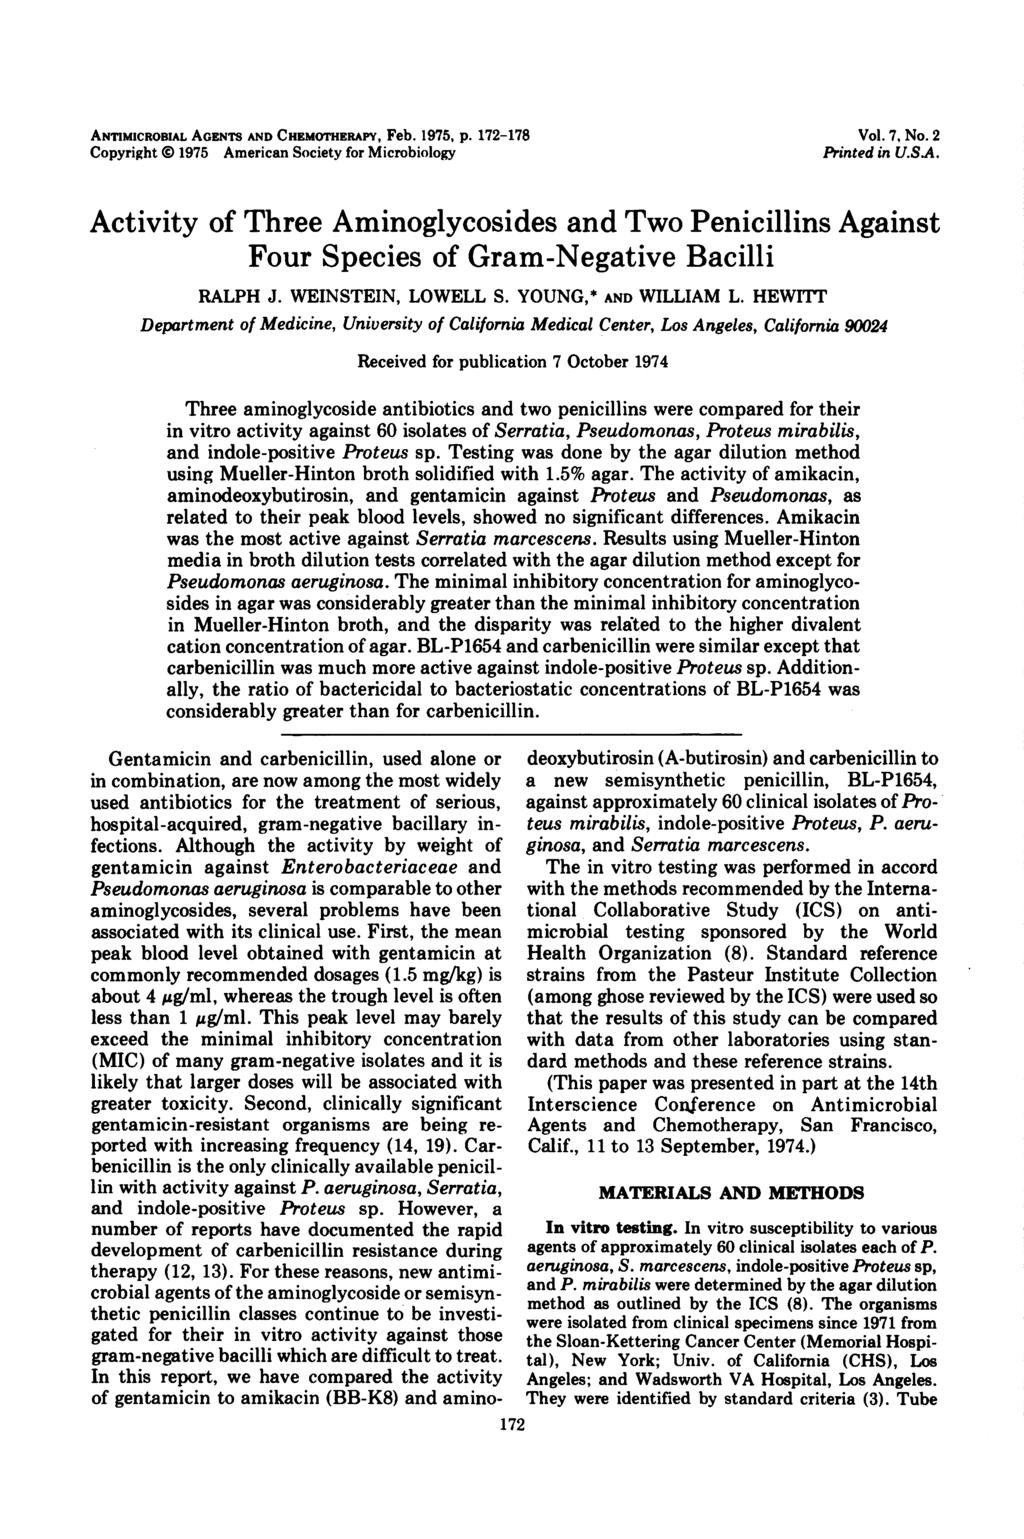 ANTIMICROBIAL AGENTS AND CHEMOTHERAPY, Feb. 1975, P. 172-178 Copyright @ 1975 American Society for Microbiology Vol. 7, No. 2 Printed in U.S.A. Activity of Three Aminoglycosides and Two Penicillins Against Four Species of Gram-Negative Bacilli RALPH J.